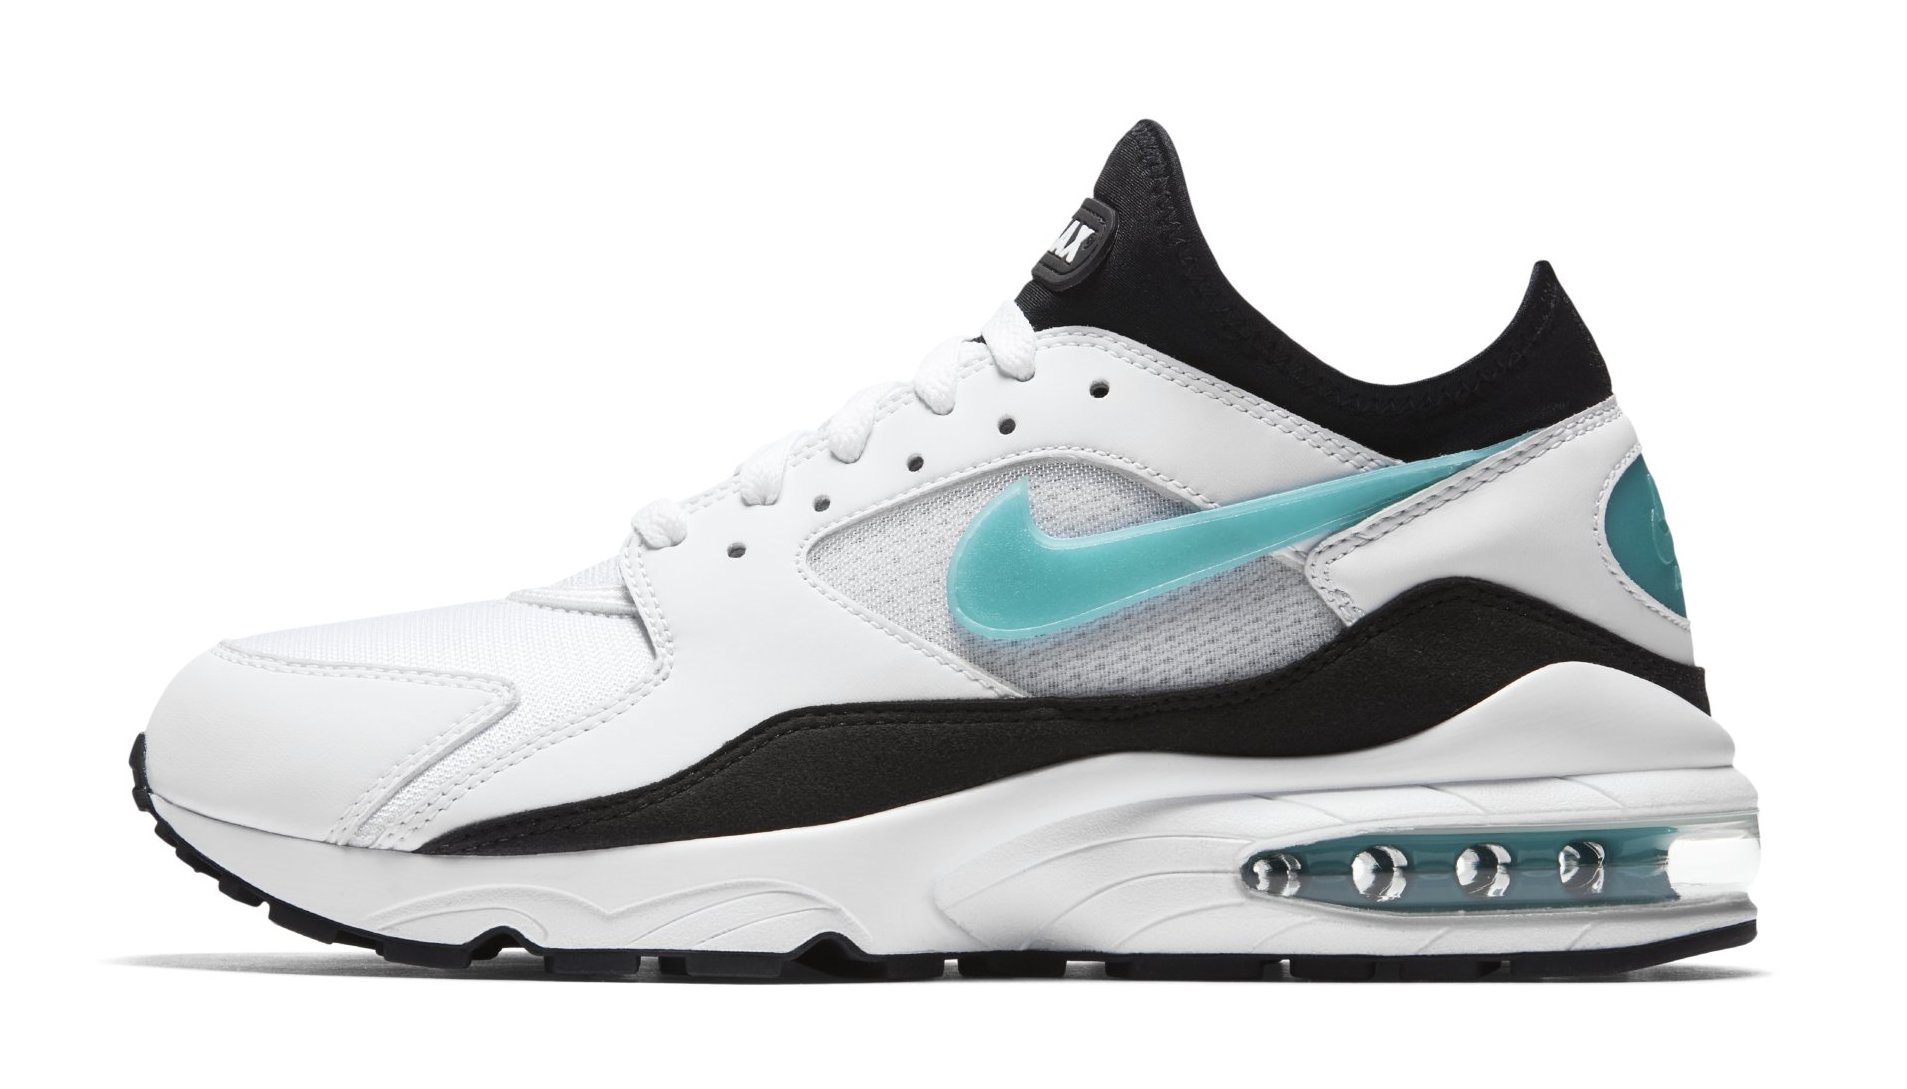 Nike Air Max 93 &#x27;Dusty Cactus&#x27; White/Sport Turquoise Black 306551 107 (Lateral)